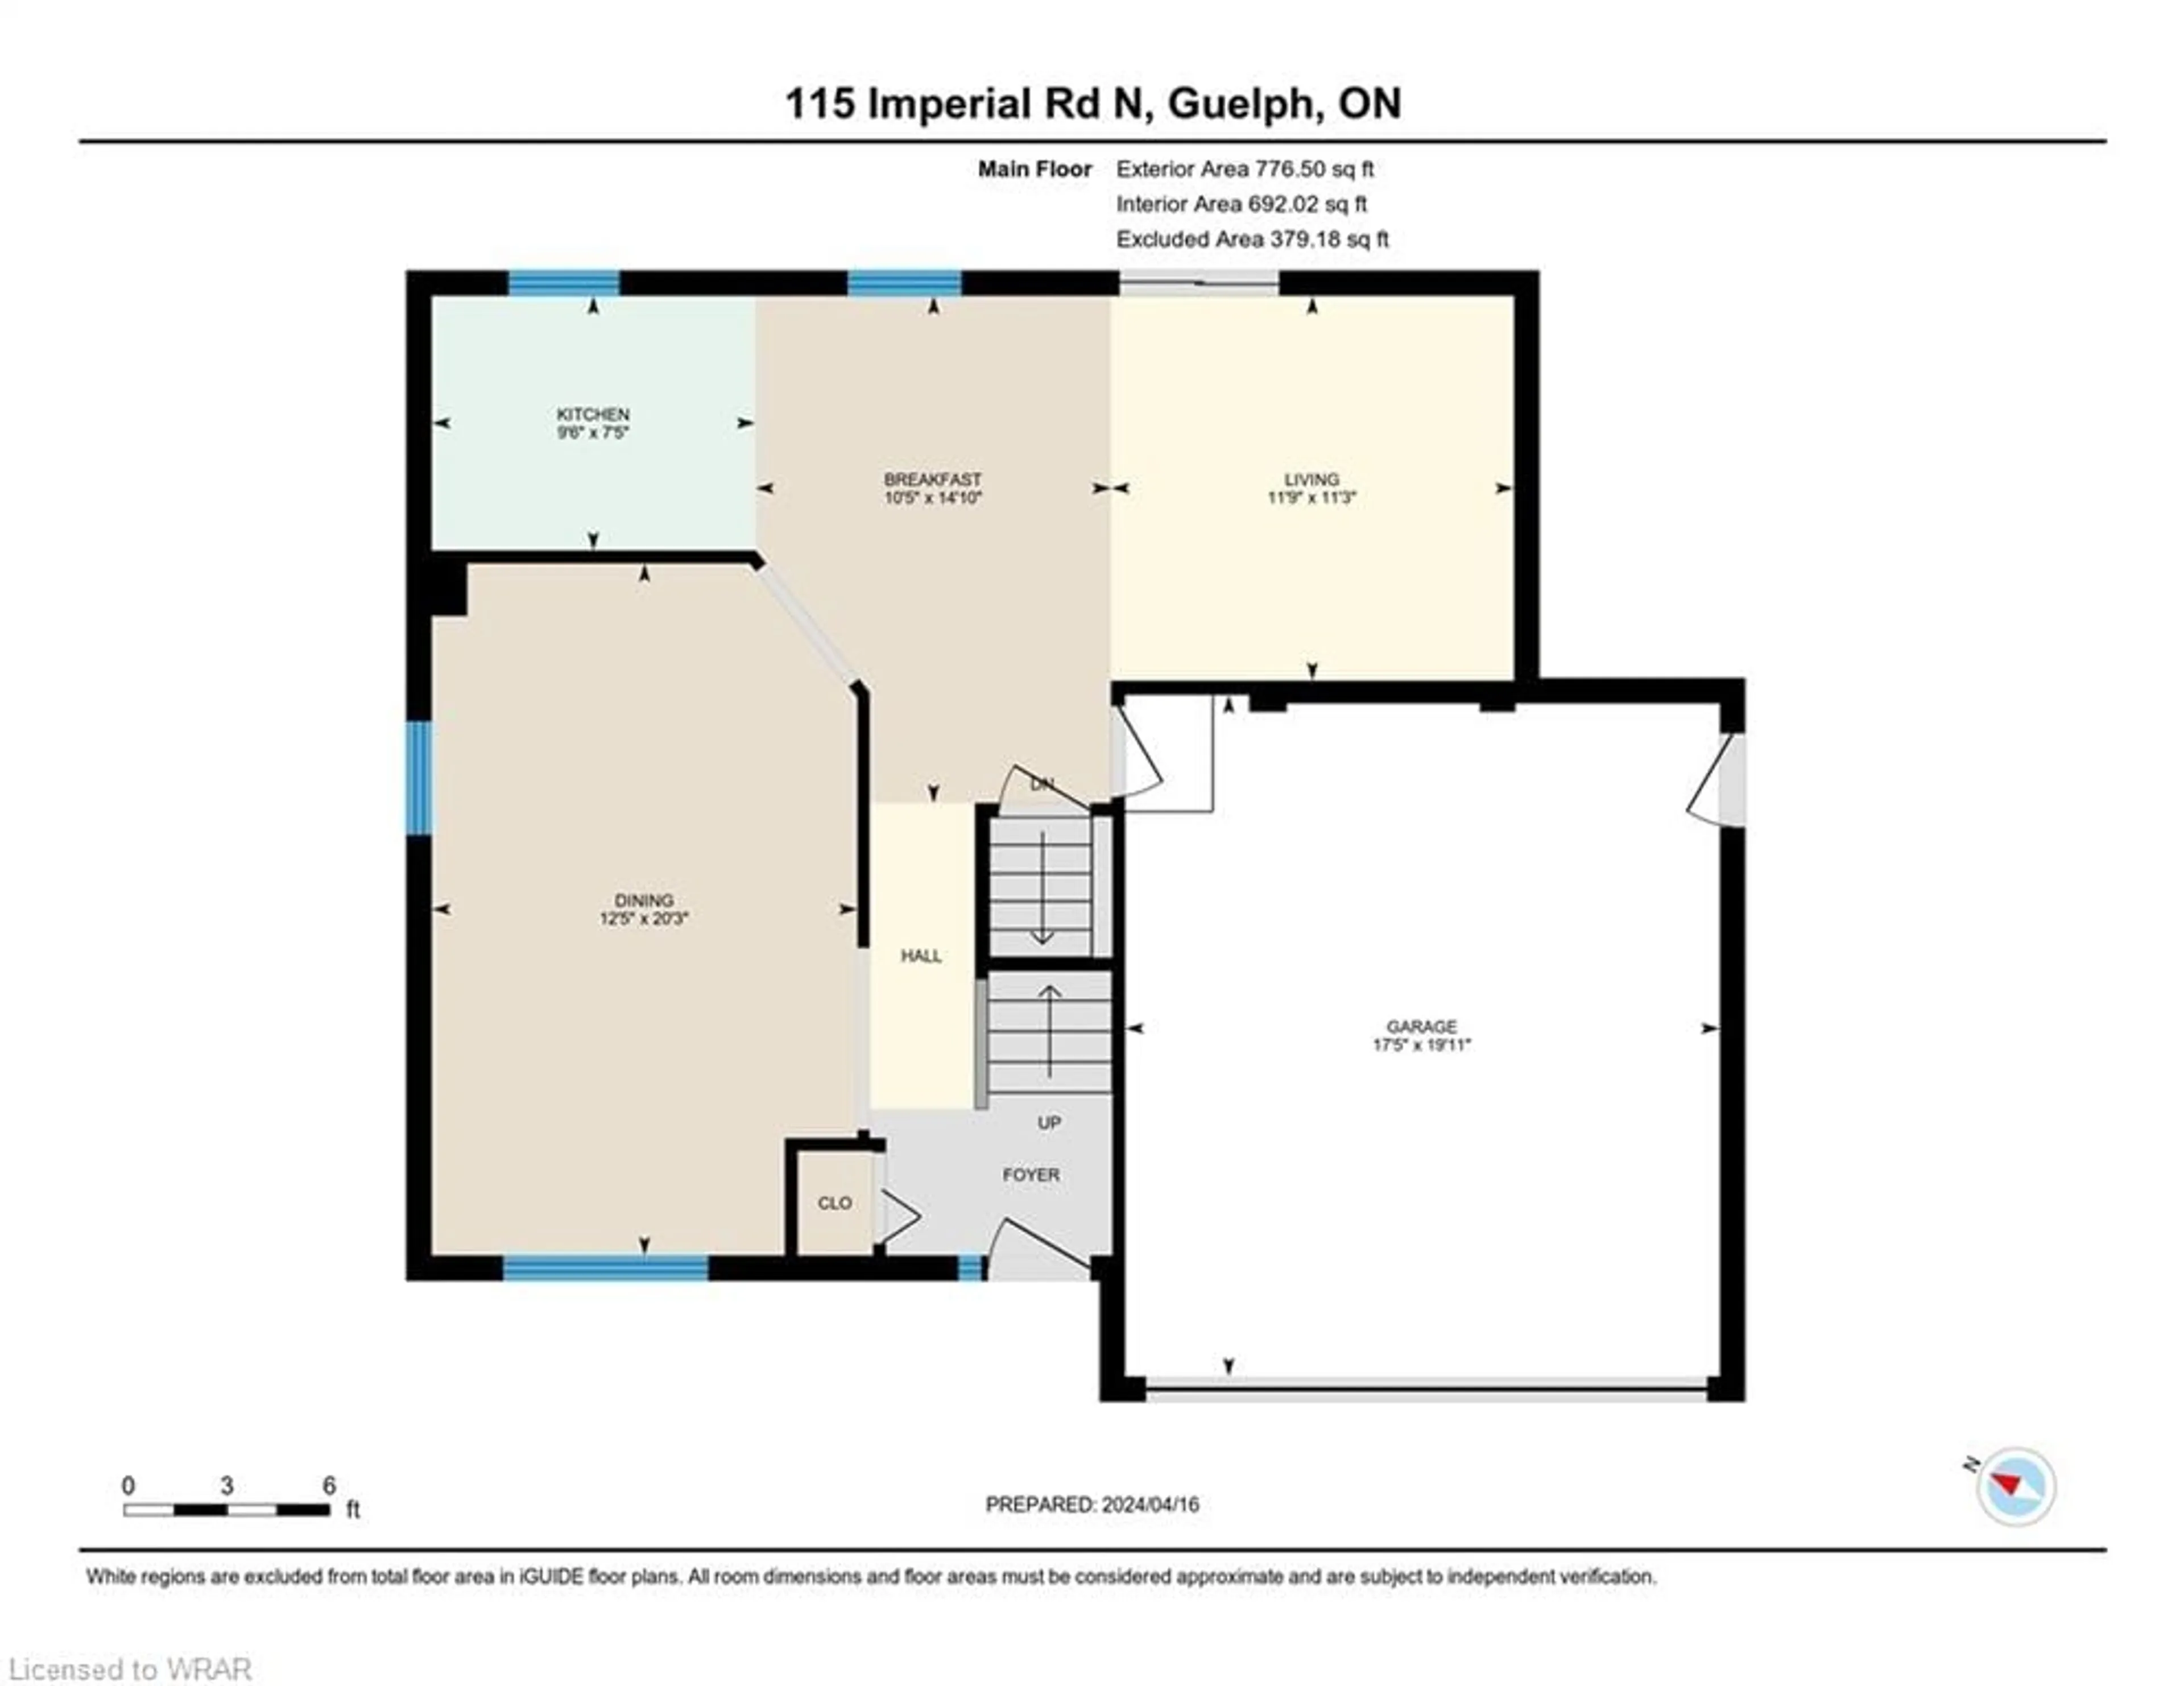 Floor plan for 115 Imperial Rd, Guelph Ontario N1H 7Z5